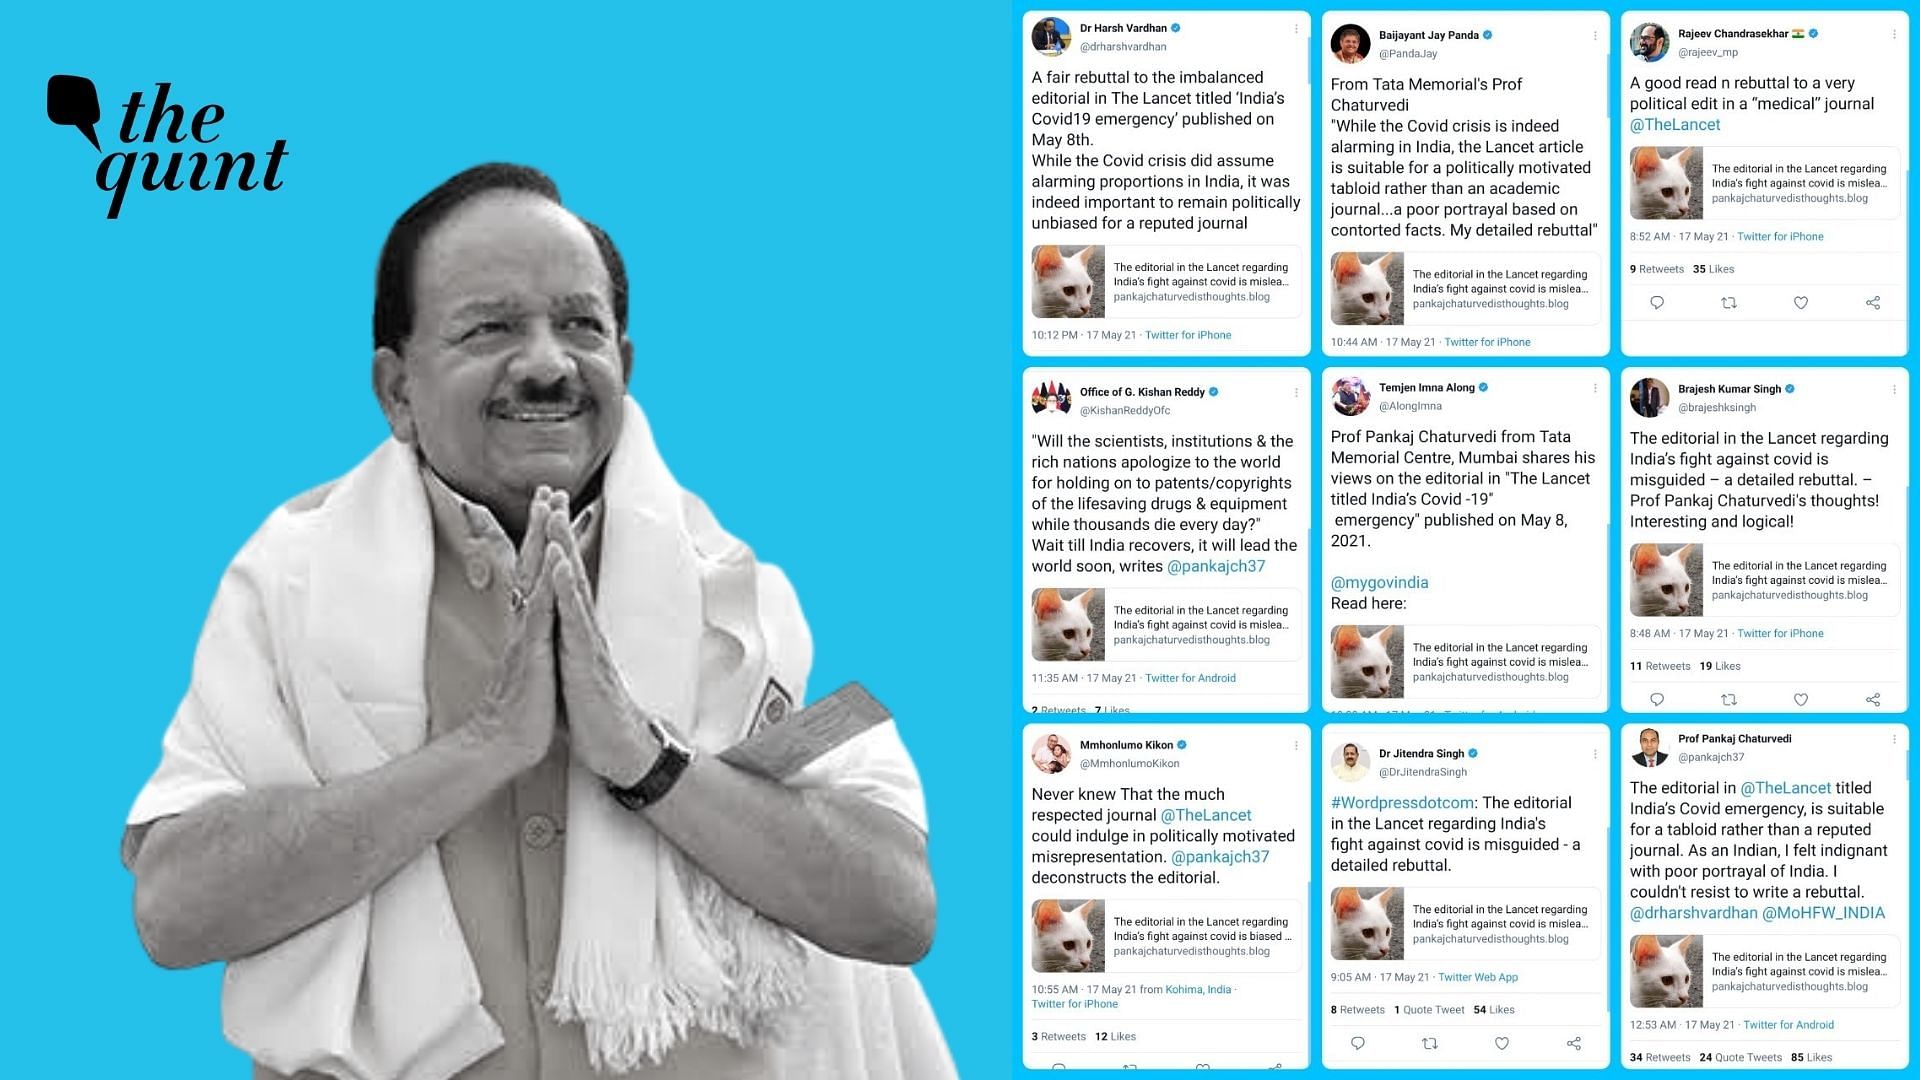 Dr Harsh Vardhan along with several other BJP leaders criticised for sharing a ‘not so sensible’ blog rebutting Lancet’s editorial on India’s COVID management.